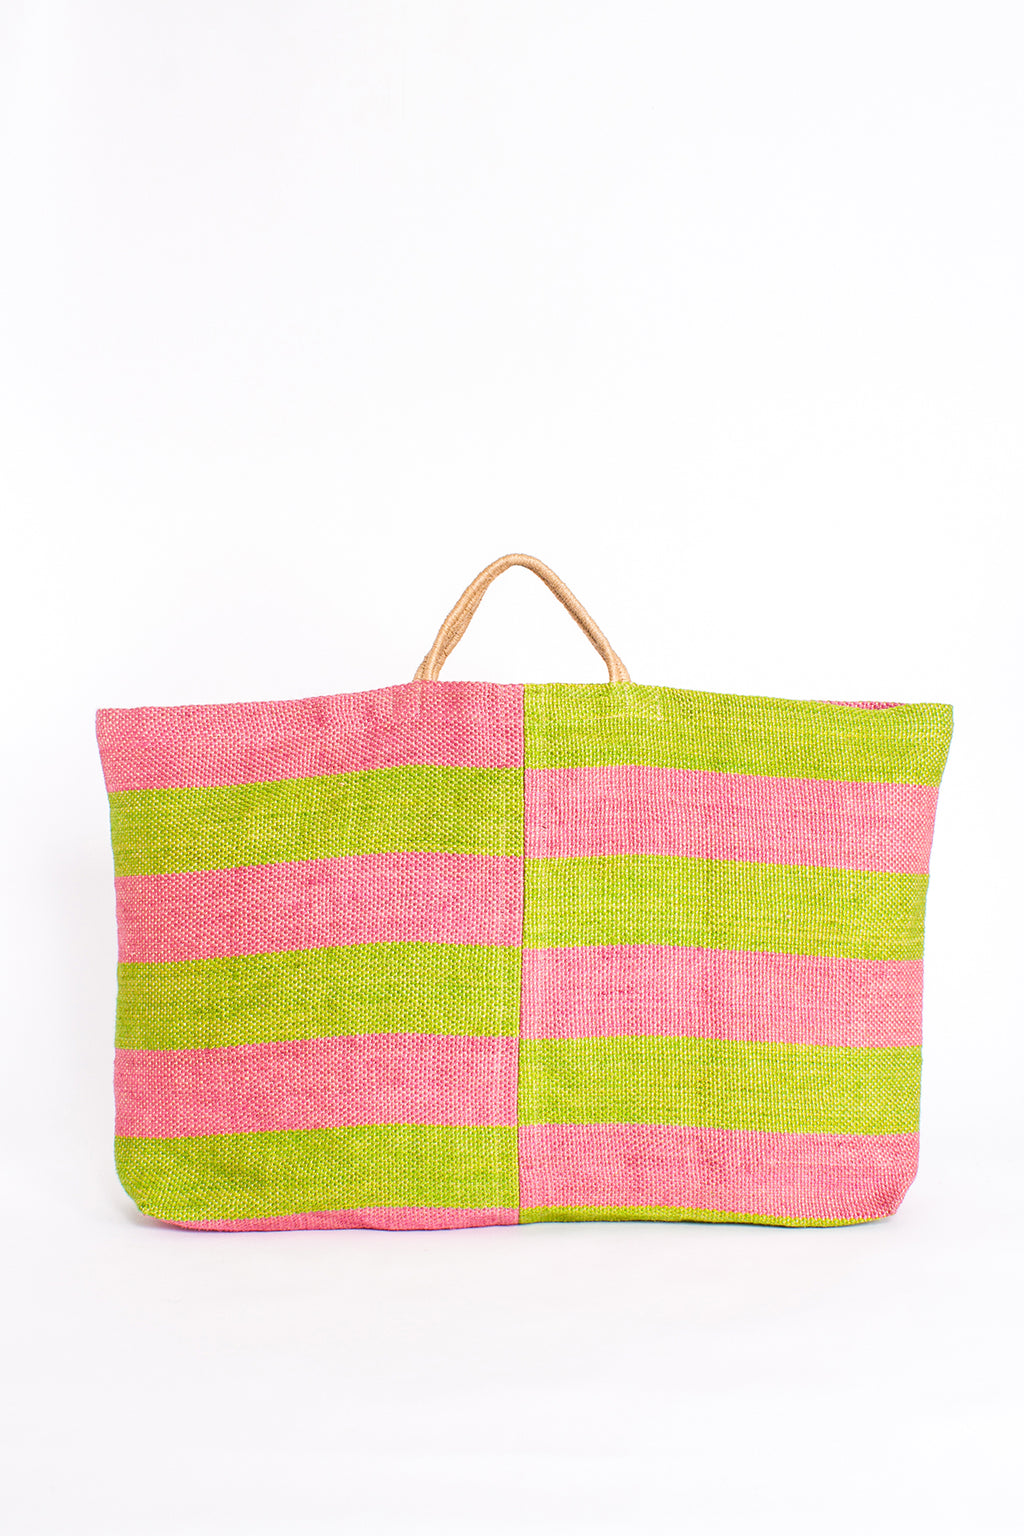 ARDDUN EXCLUSIVE – EXTRA LARGE JUTE HOLD-ALL – PINK/GREEN